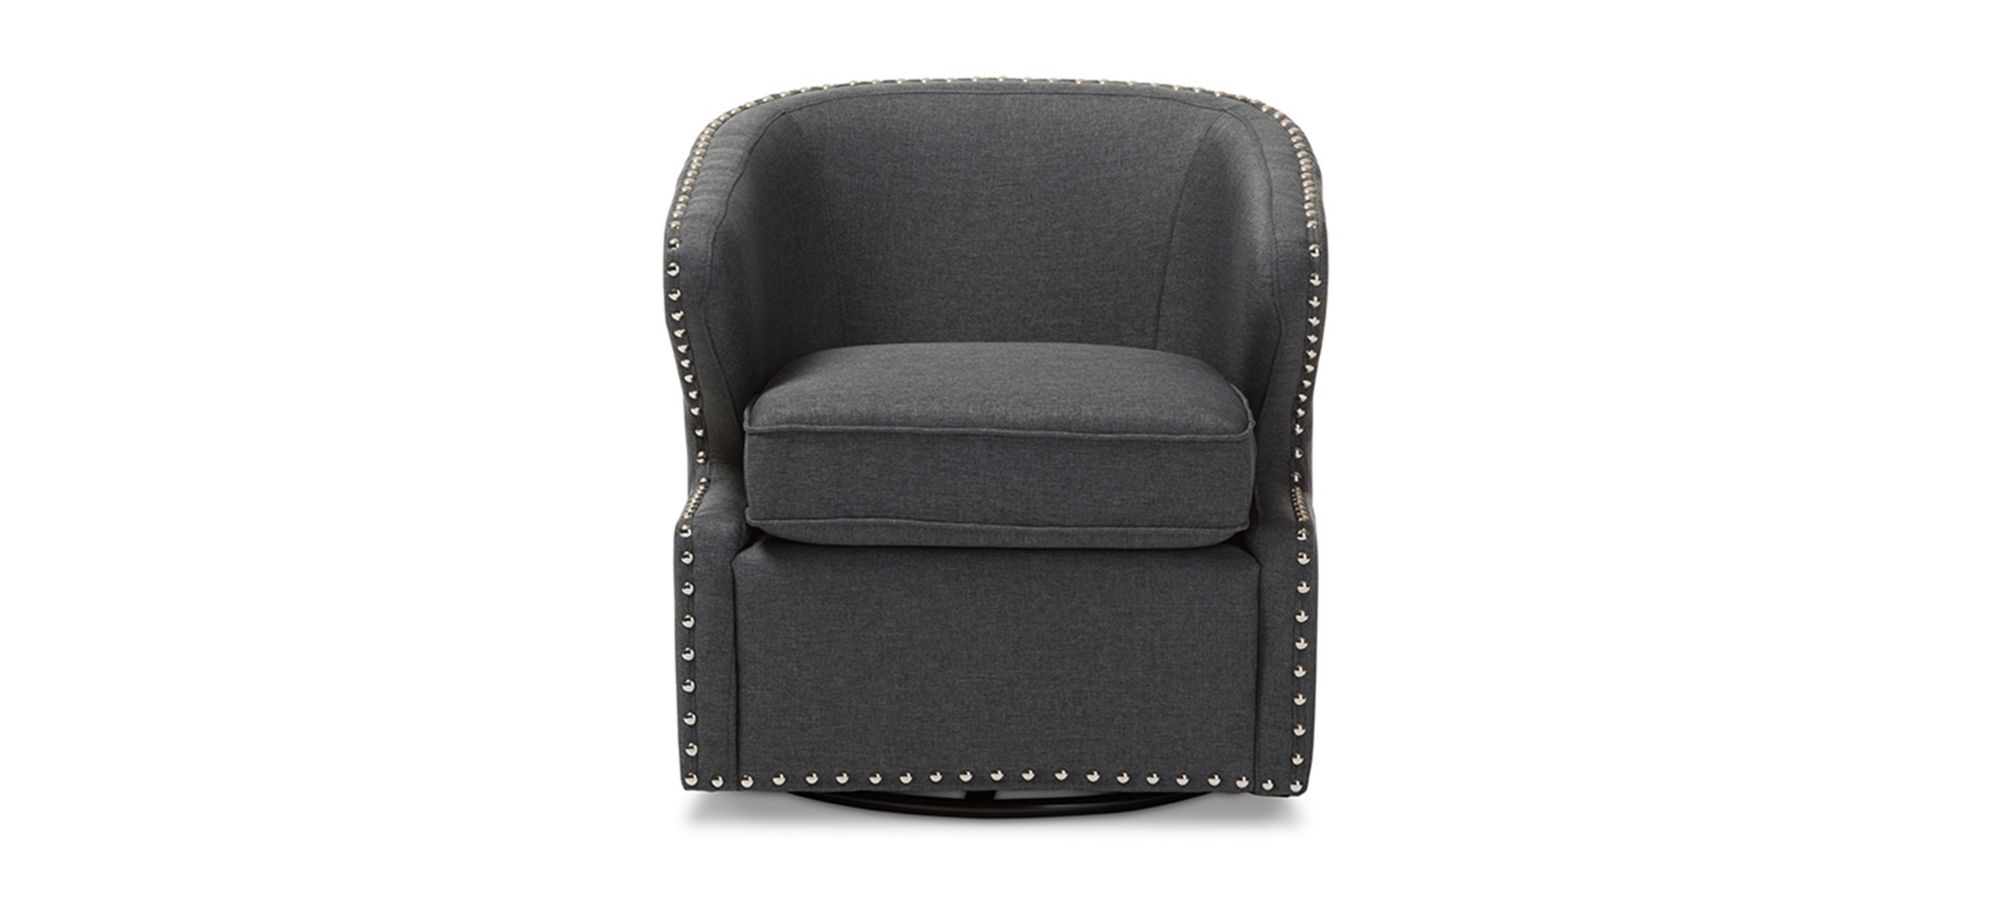 Finley Swivel Armchair in Gray by Wholesale Interiors